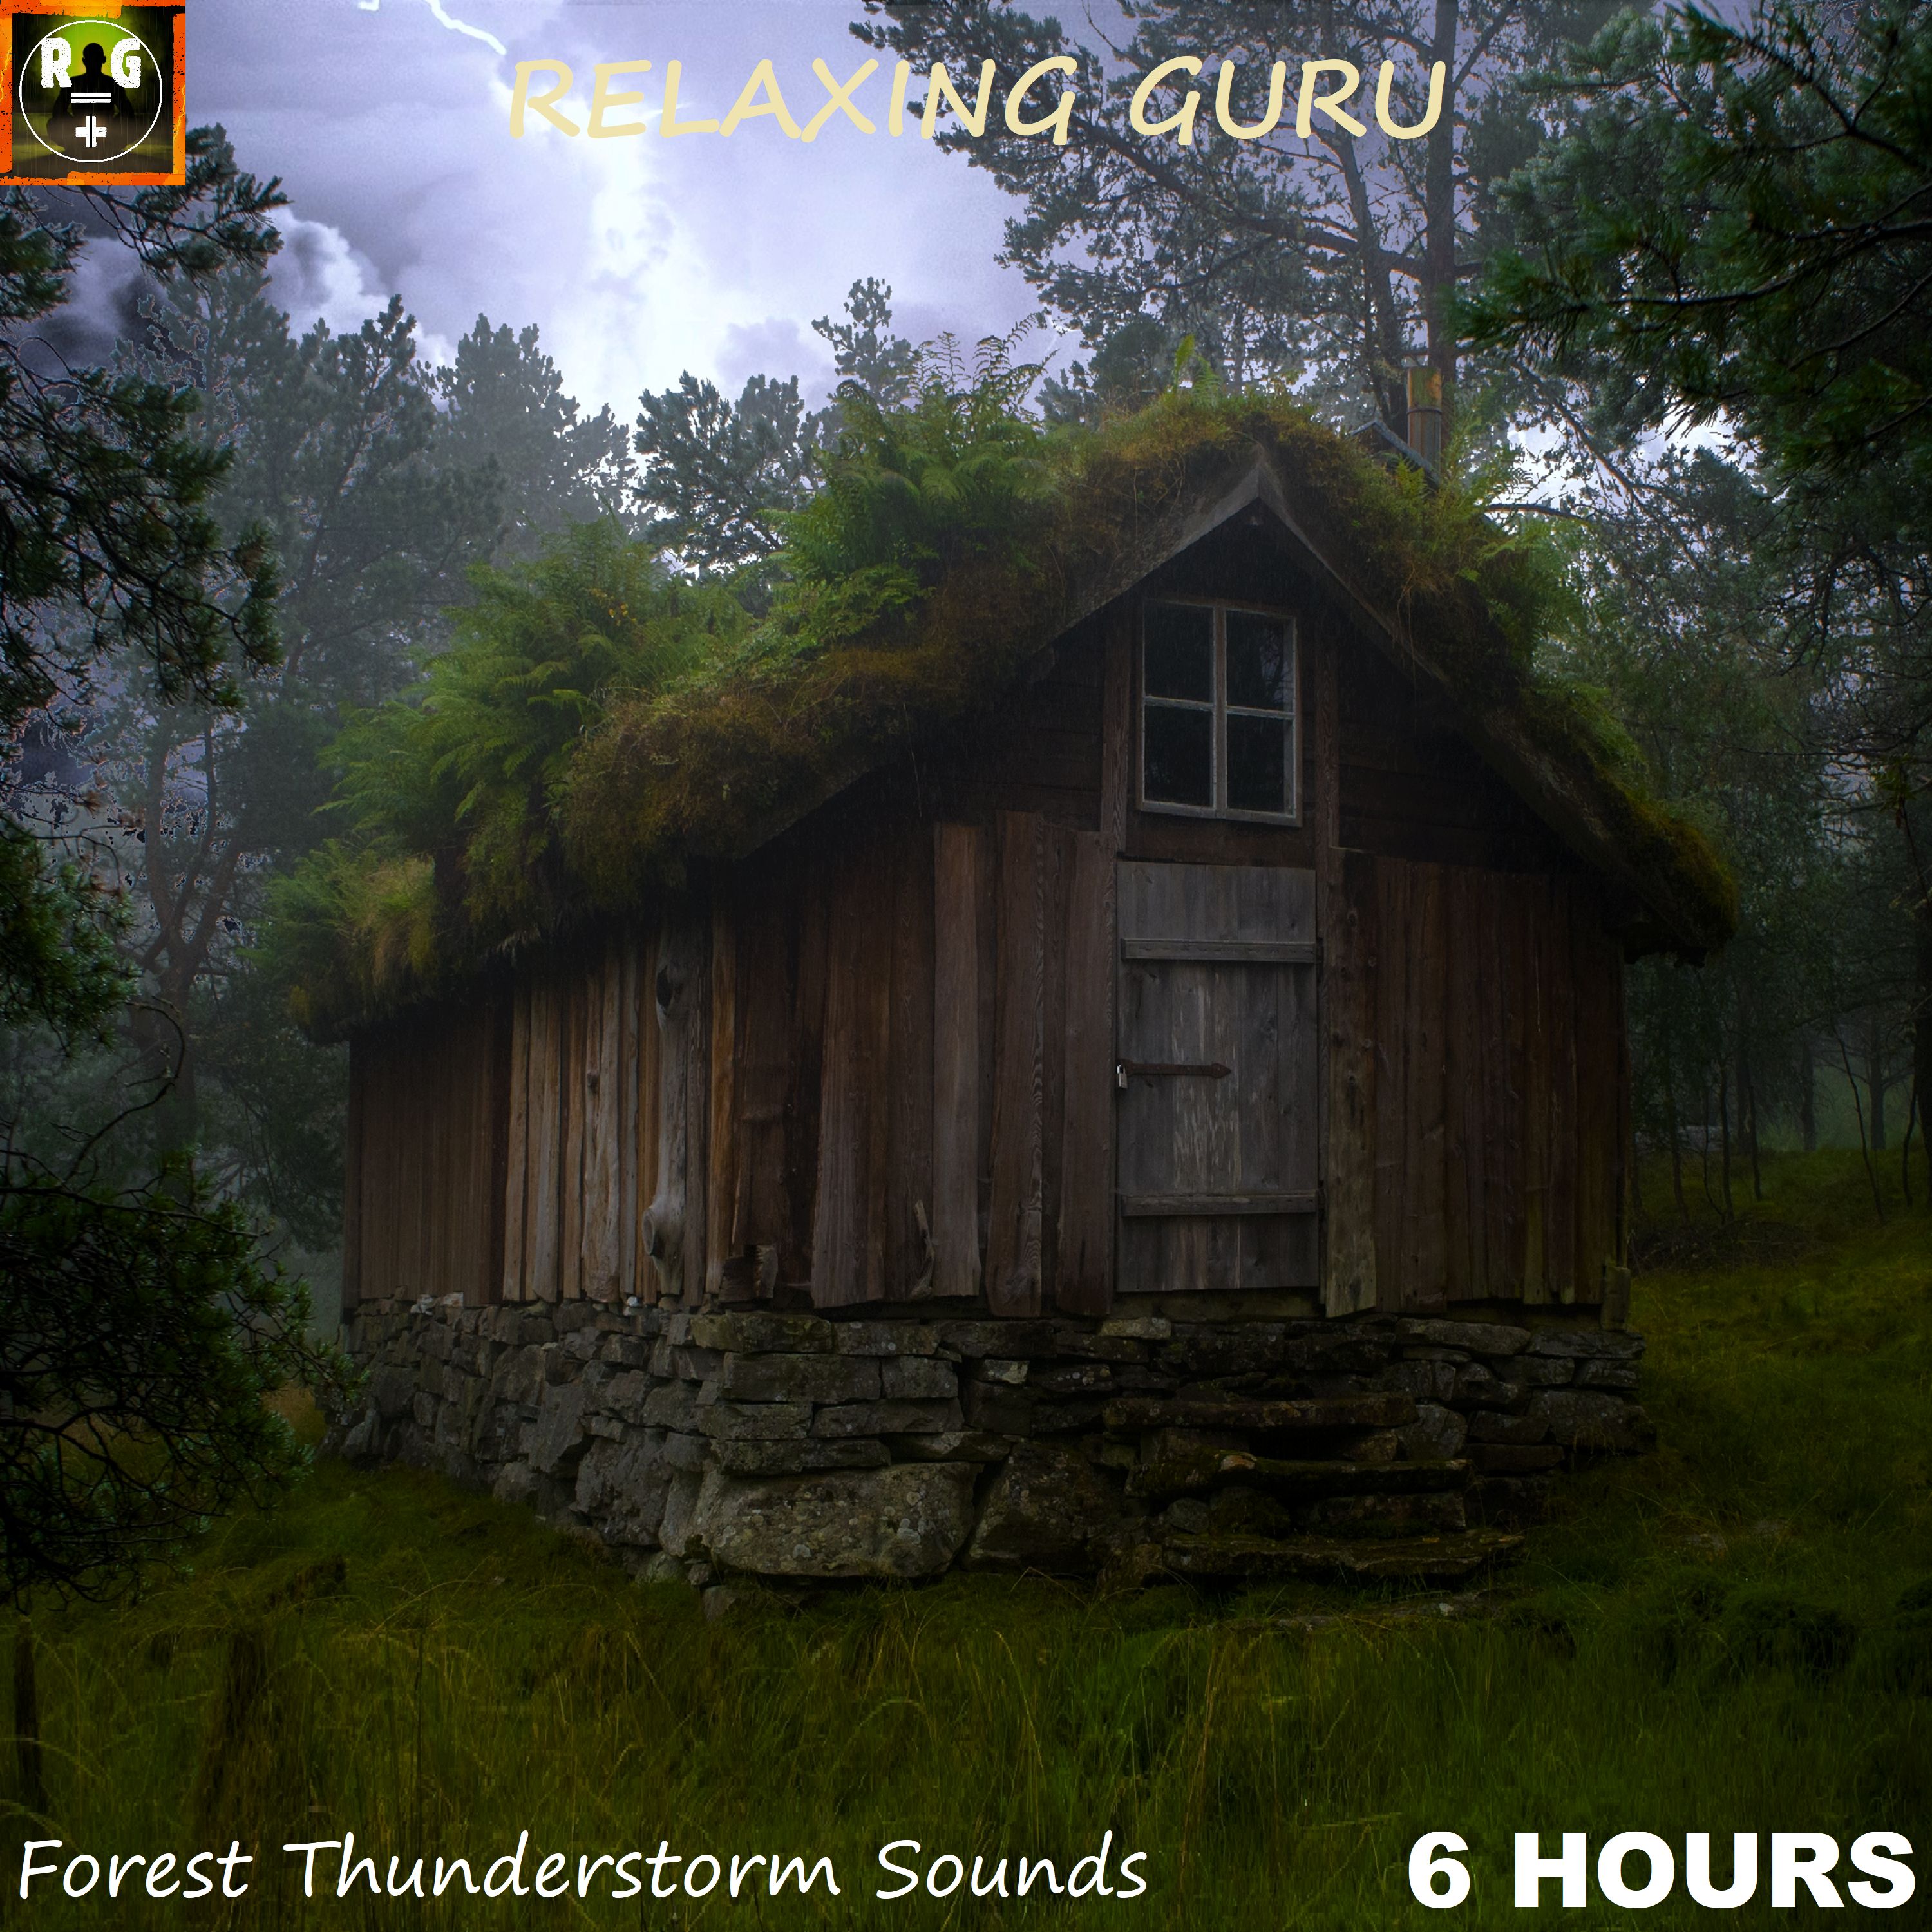 Landa Relaxing Rain & Thunder on a Wooden Hut deep in the Forest - Thunderstorm Sounds for Sleep (6 HOURS)